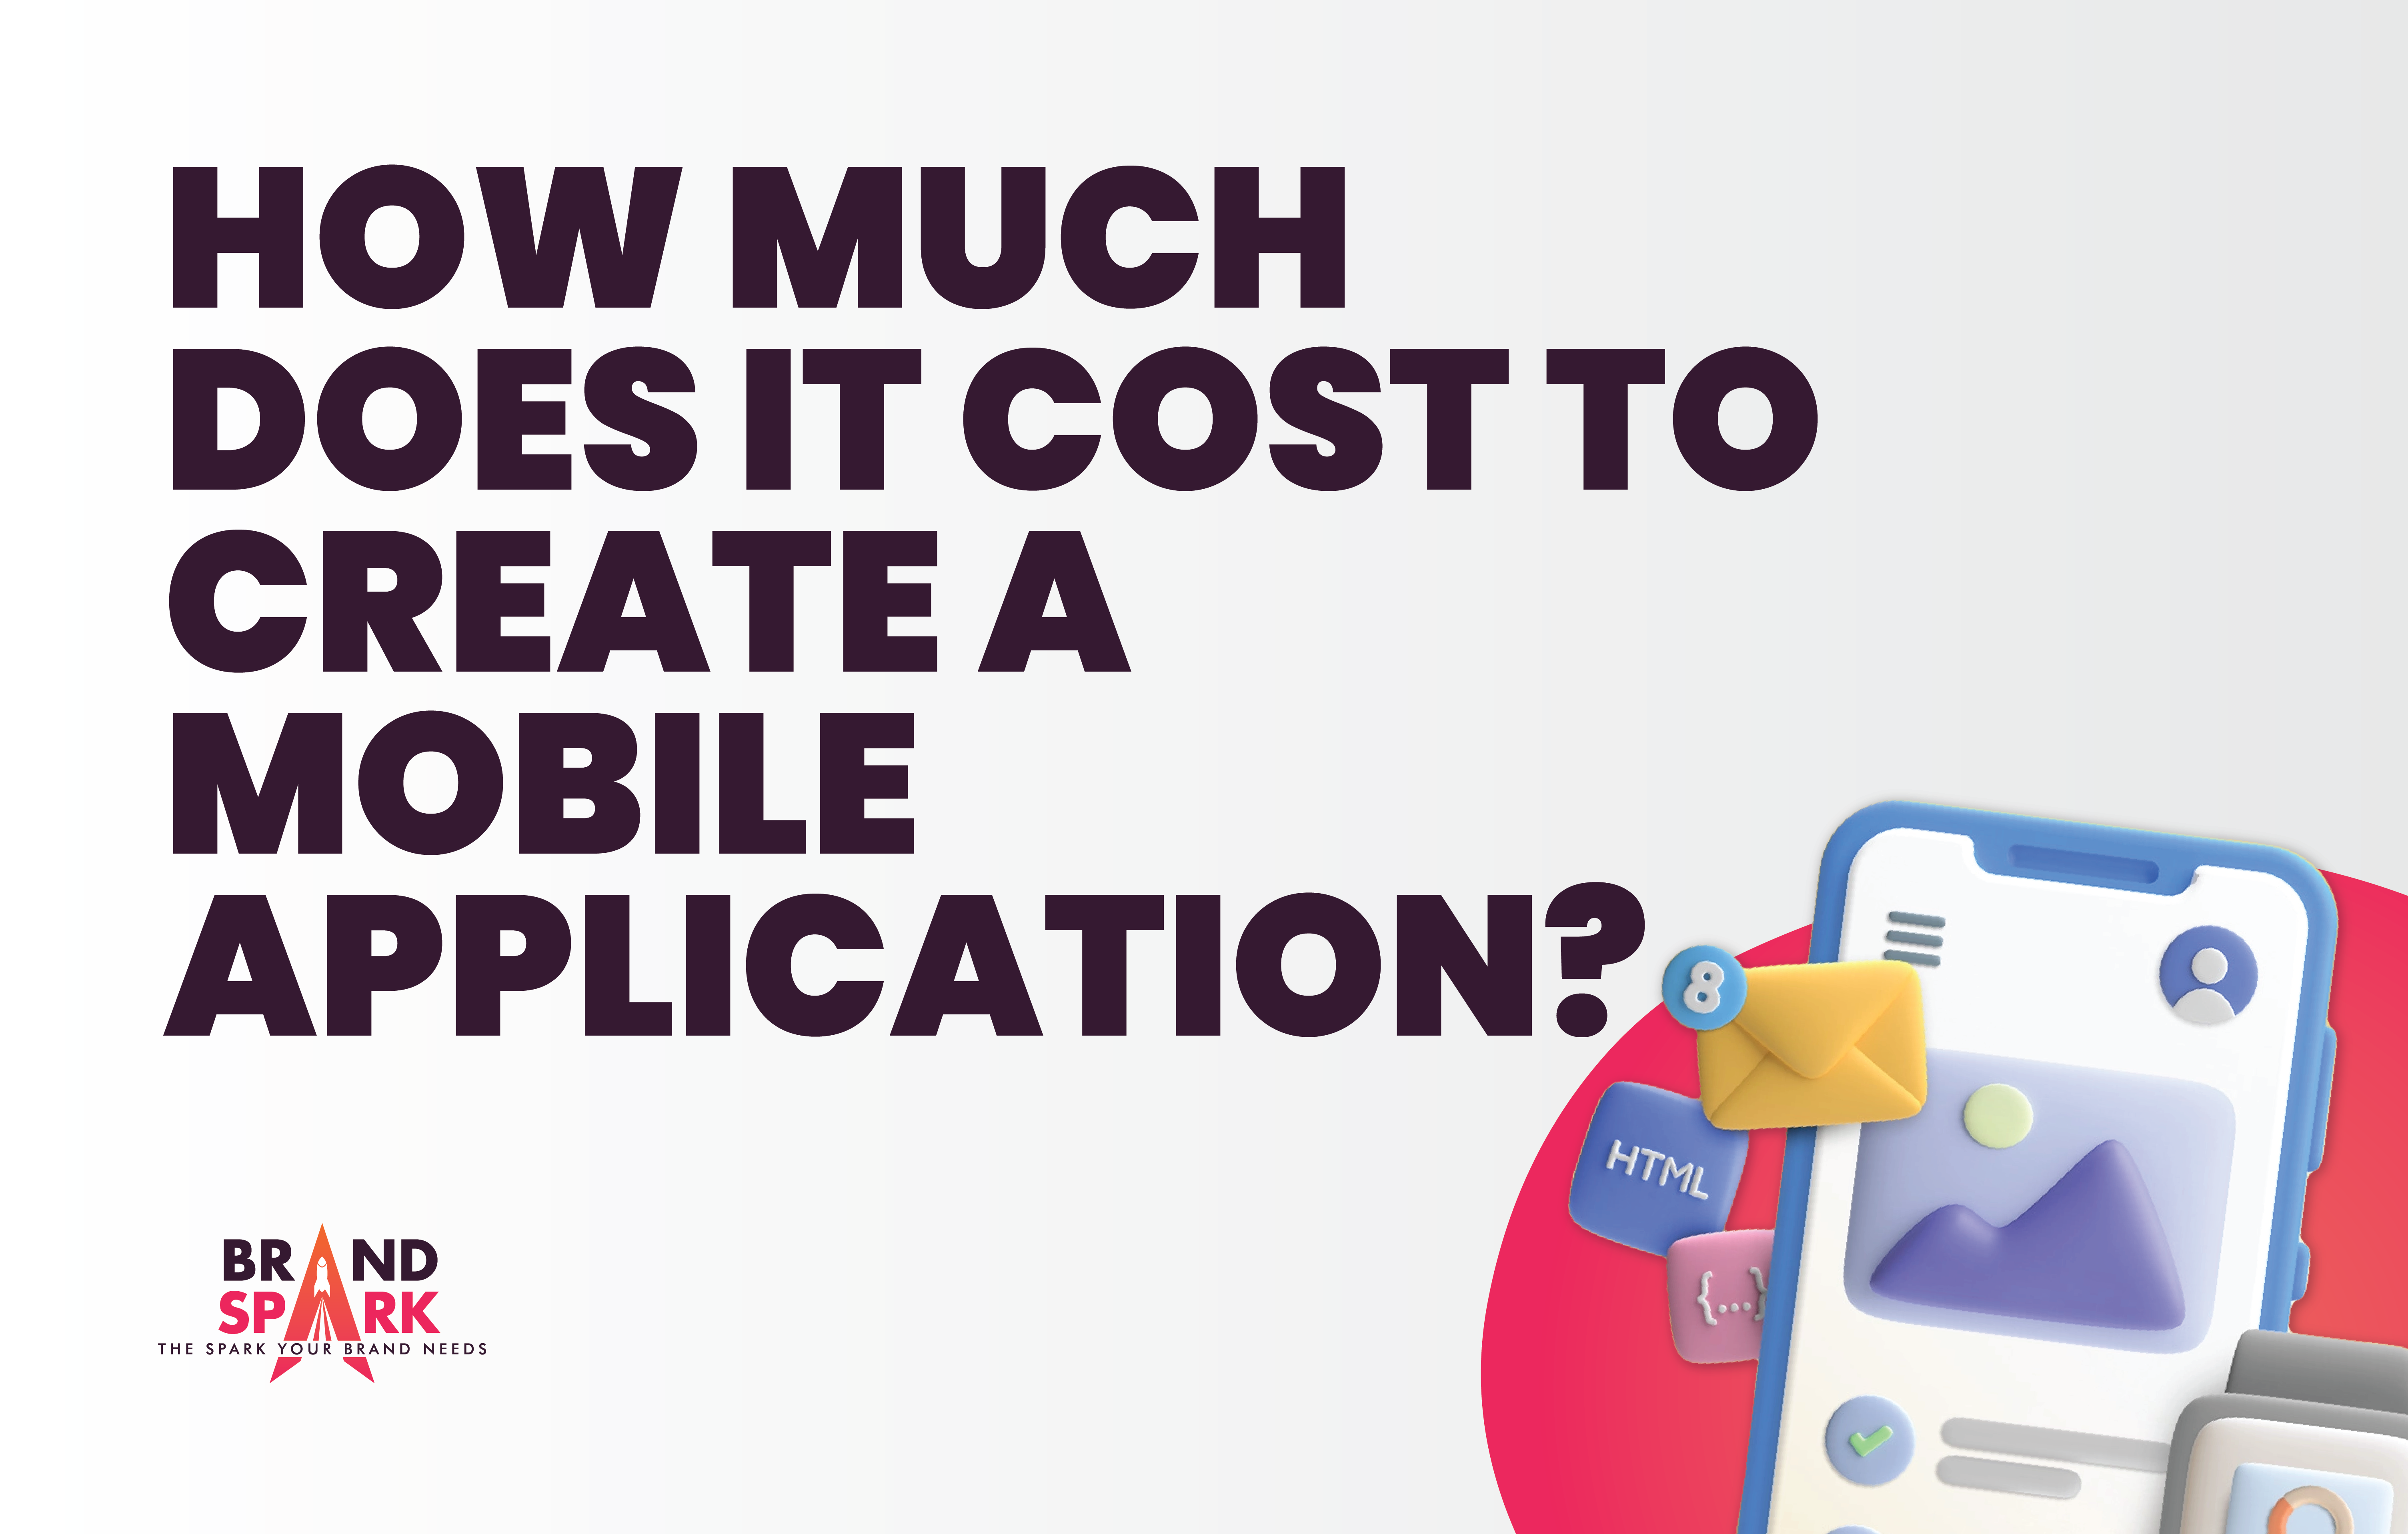 How Much Does It Cost To Create A Mobile Application?